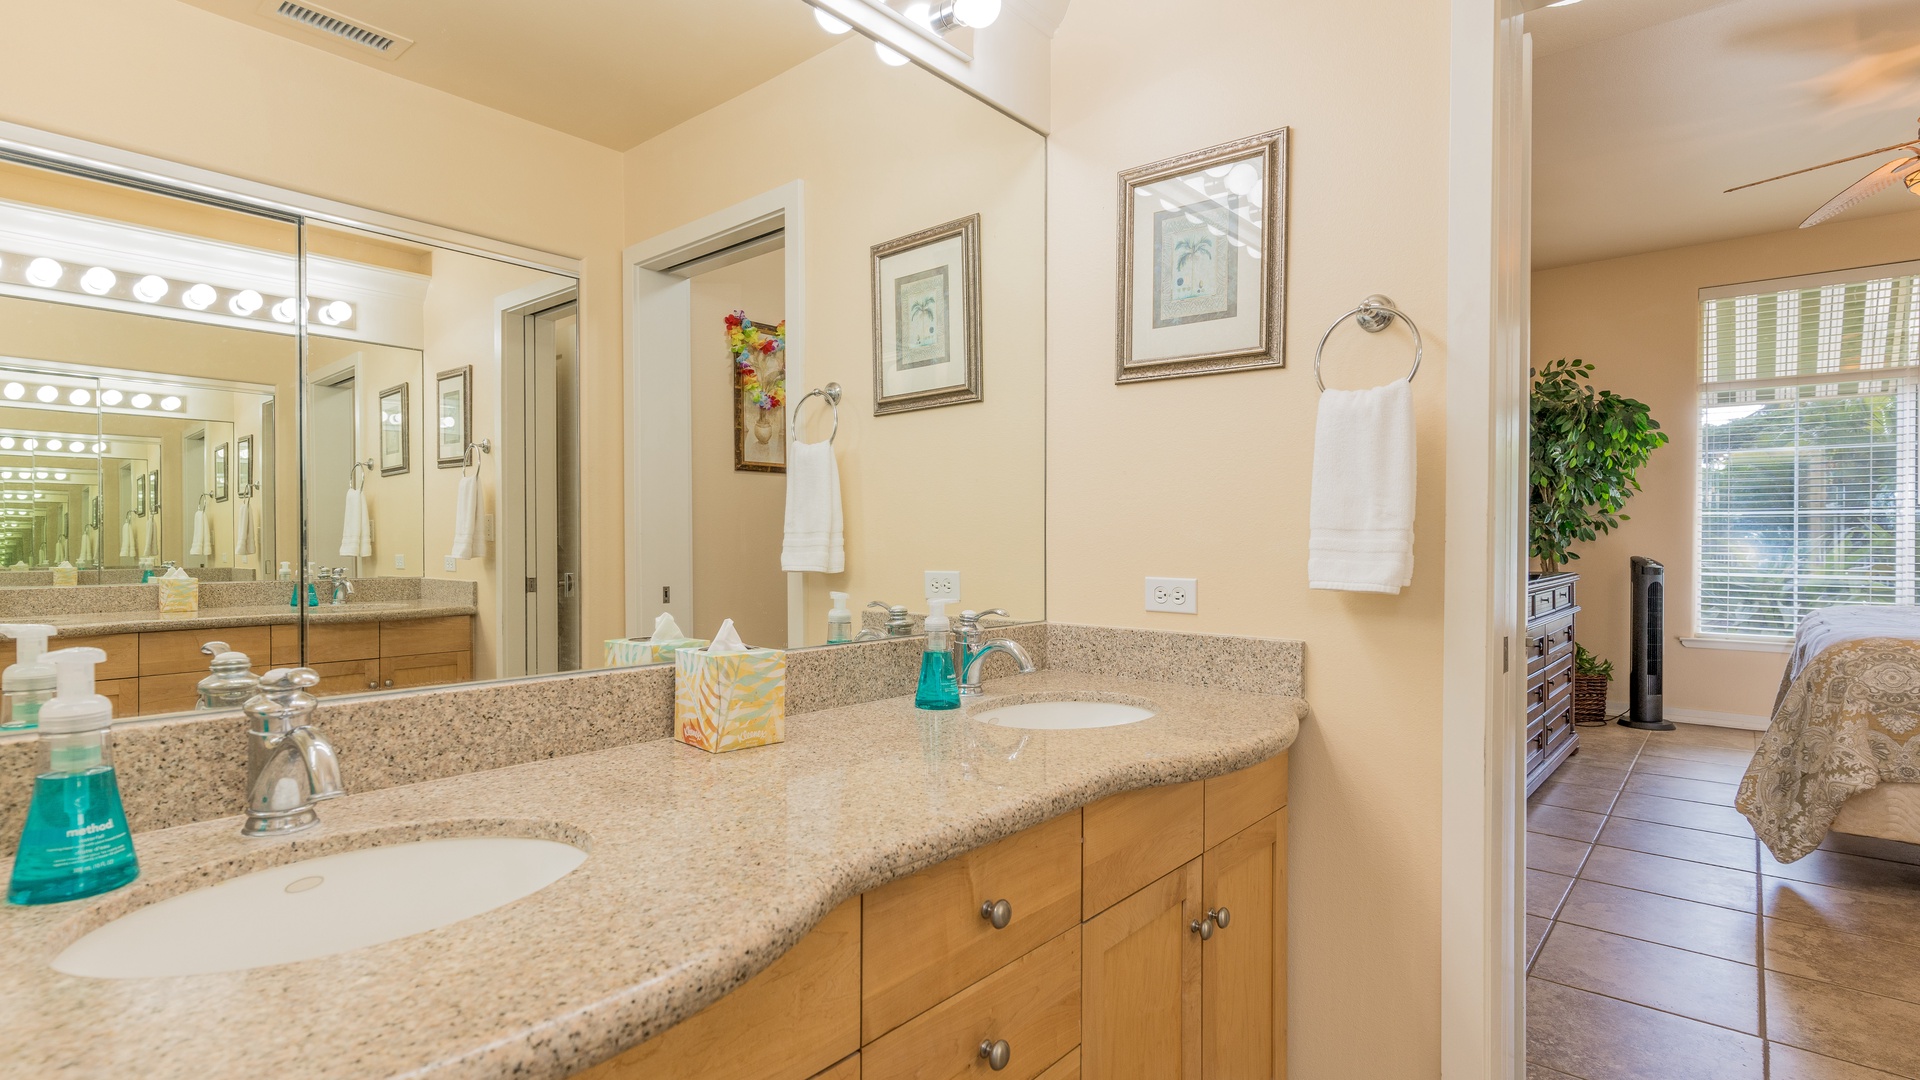 Kapolei Vacation Rentals, Kai Lani 8B - The primary guest bathroom with a double vanity.